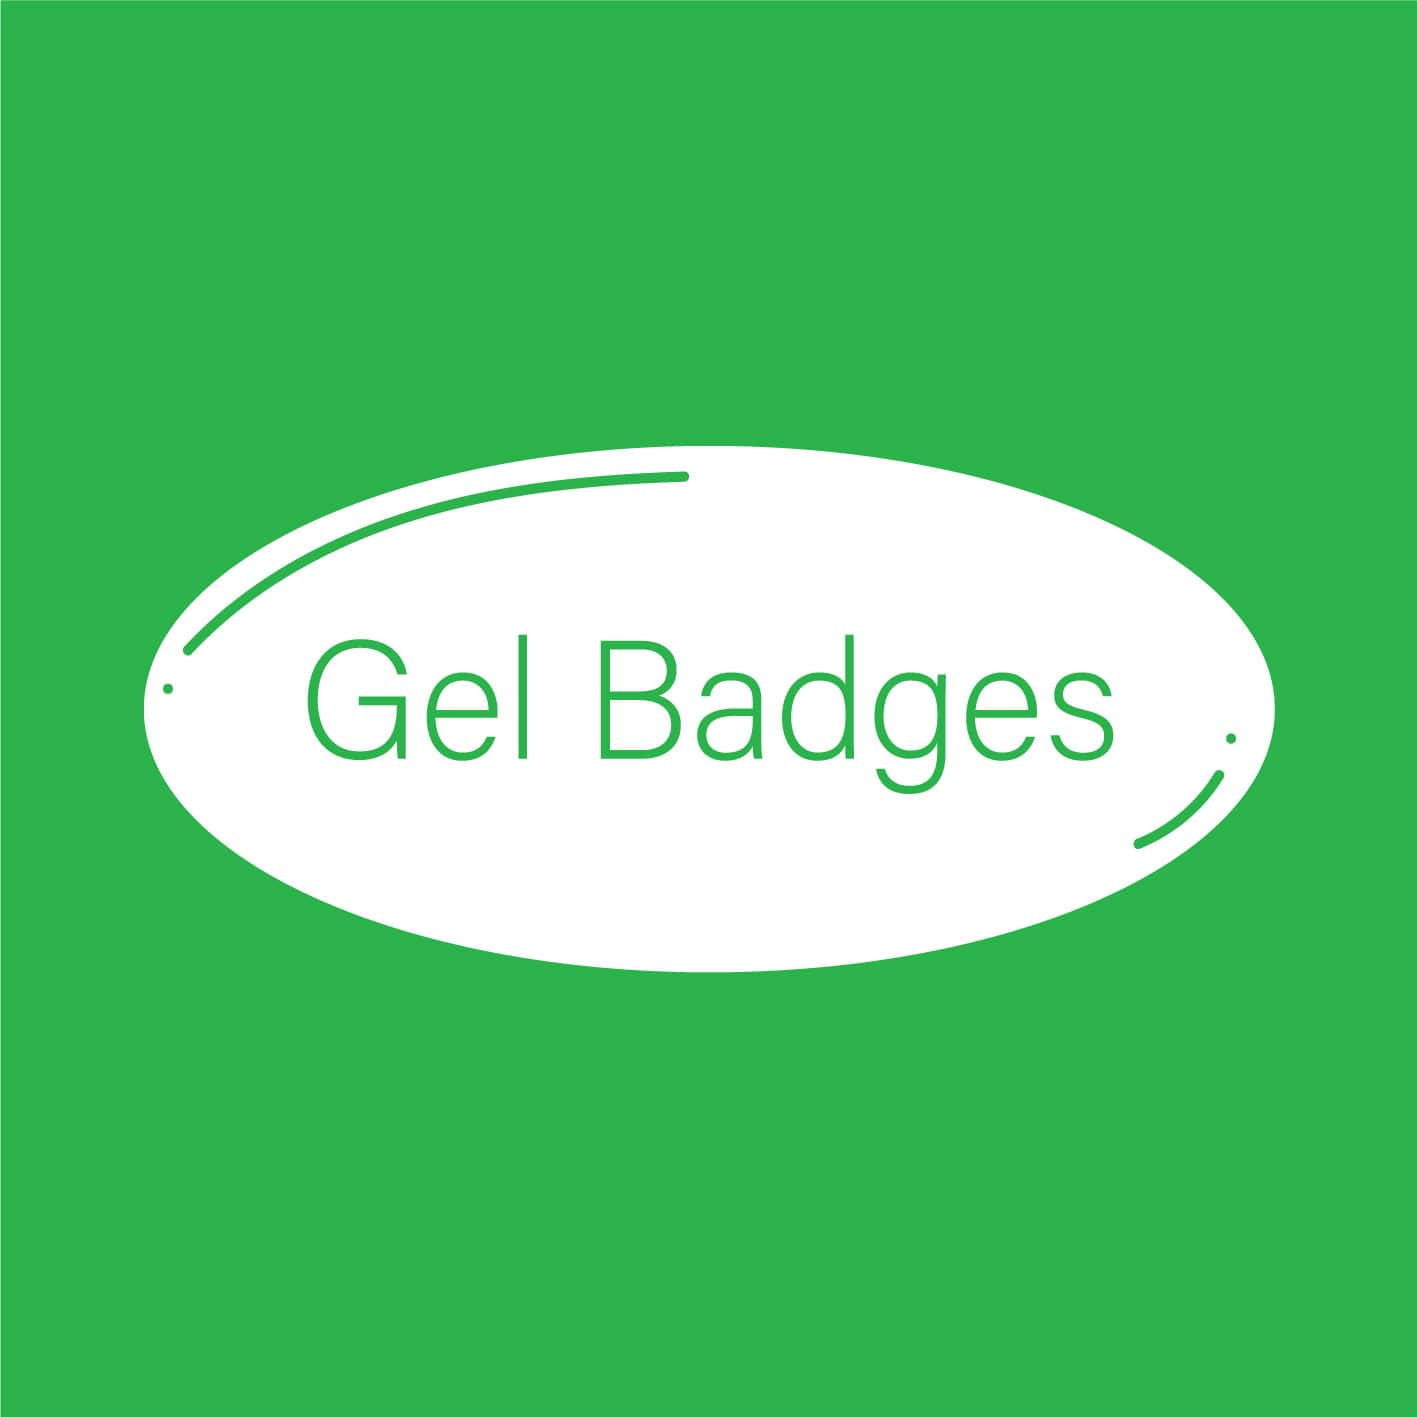 gel badges text on a green background